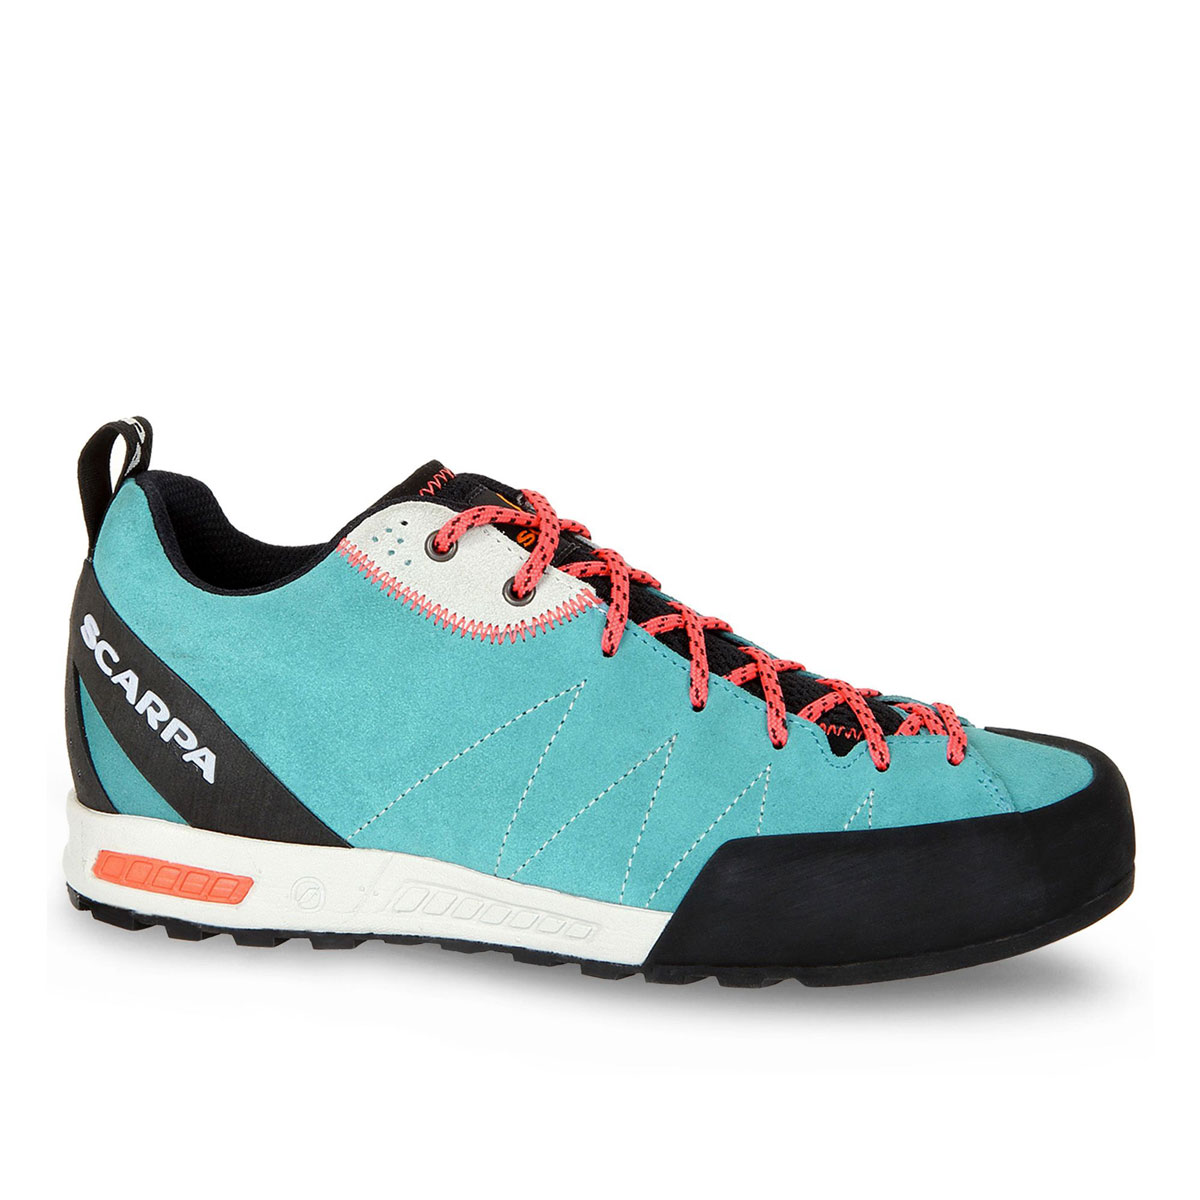 Scarpa Gecko - Women's - Ice Fall / Coral Red